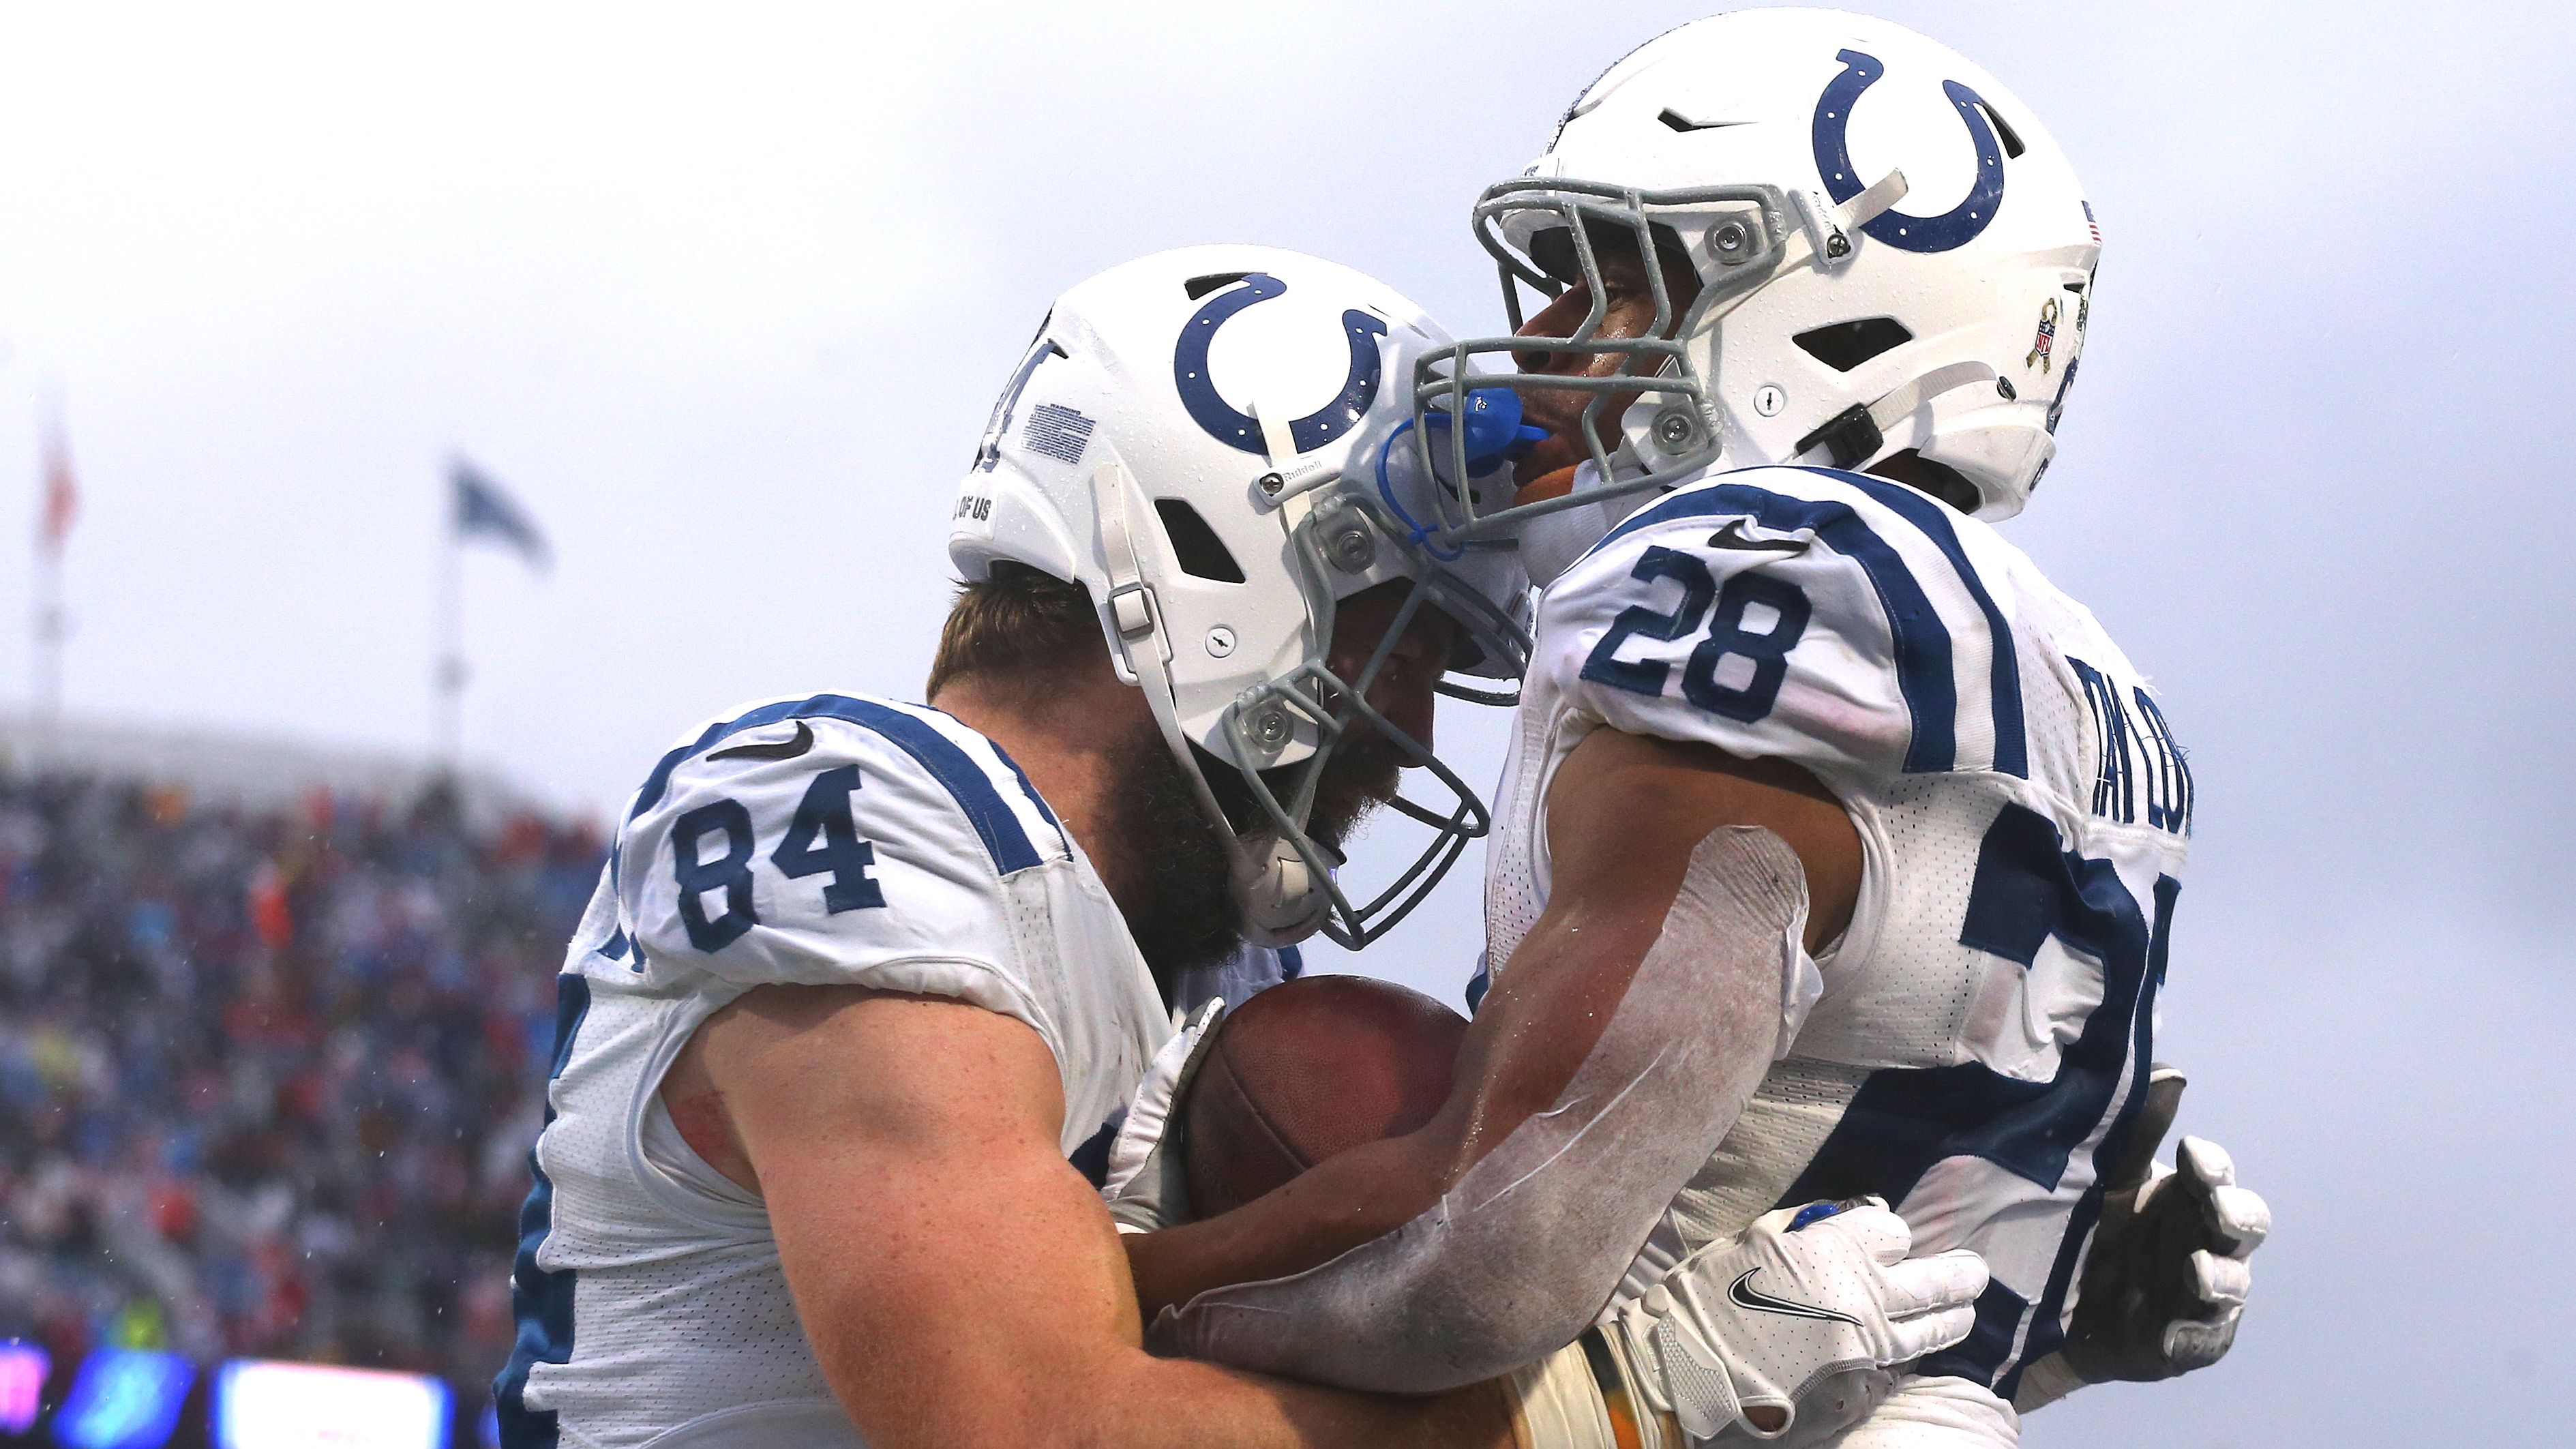 Taylor celebrates a touchdown with Jack Doyle during the third quarter against the Bills.